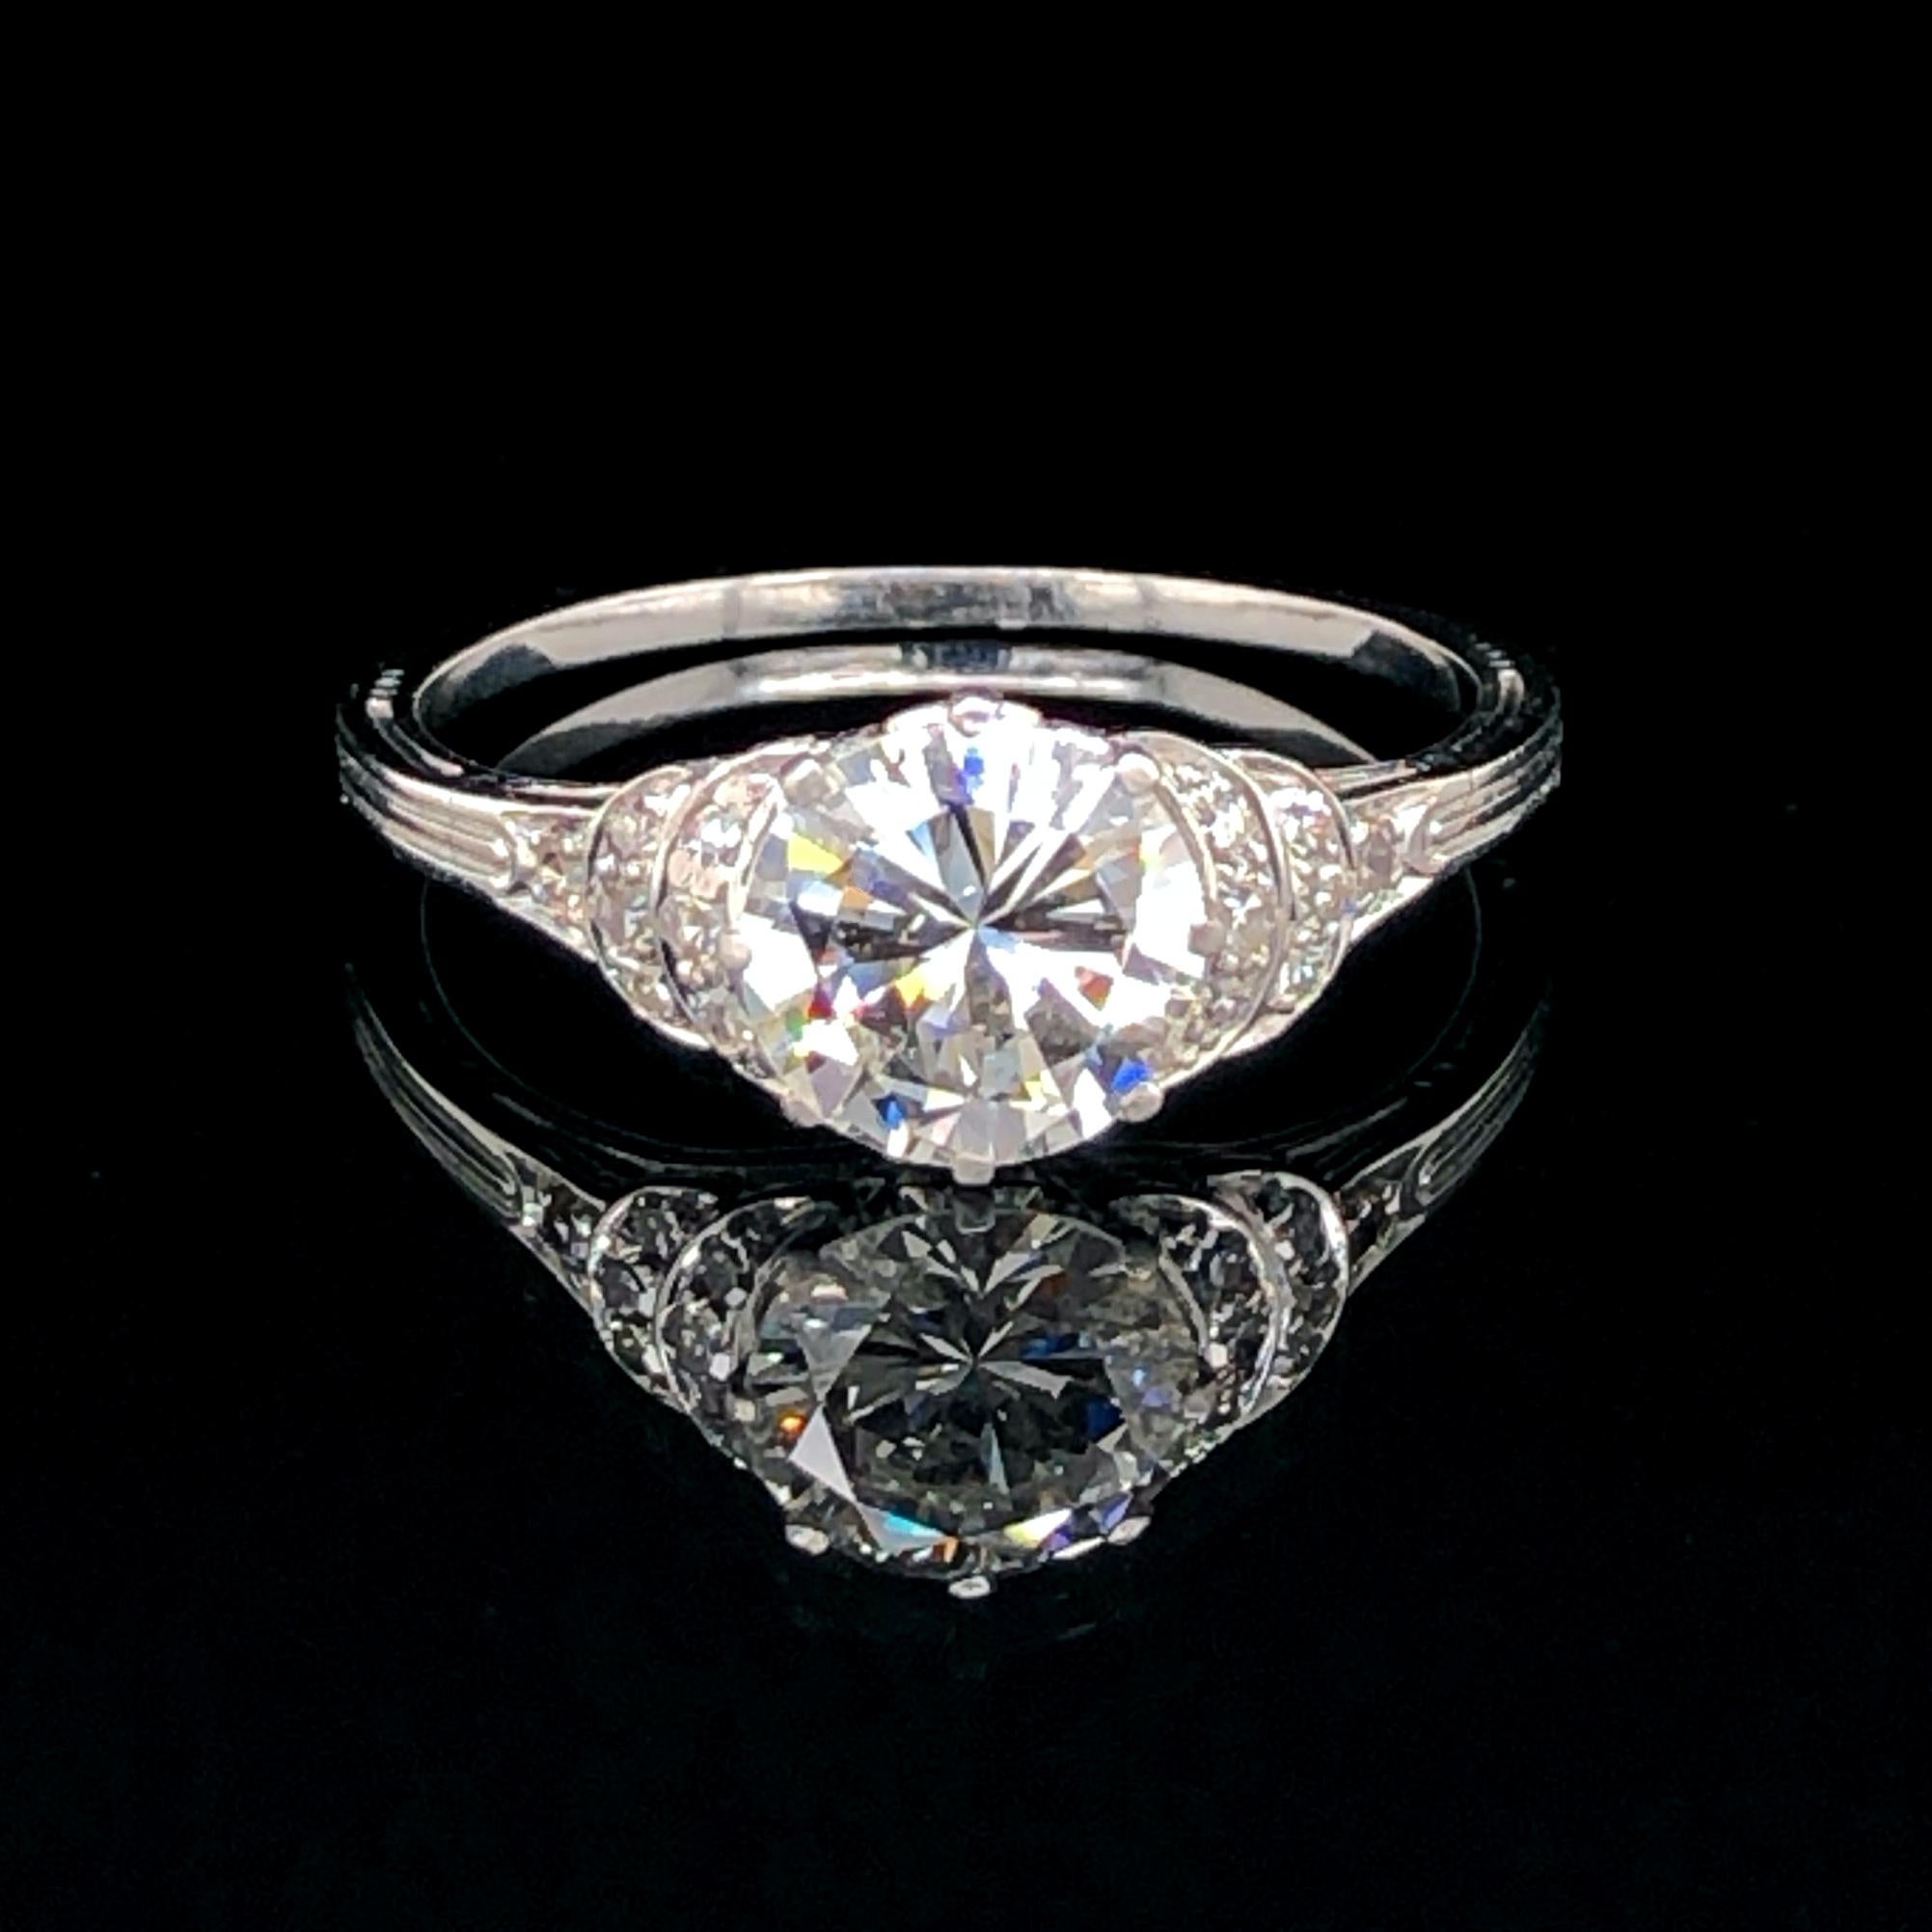 A beautiful Art Deco diamond solitaire ring in platinum, ca. 1920s. The centre diamond weighs approximately 1.60ct and is of G/H colour and VS clarity, accompanied by a HRD certificate. It is flanked by a curved step design set with single cut